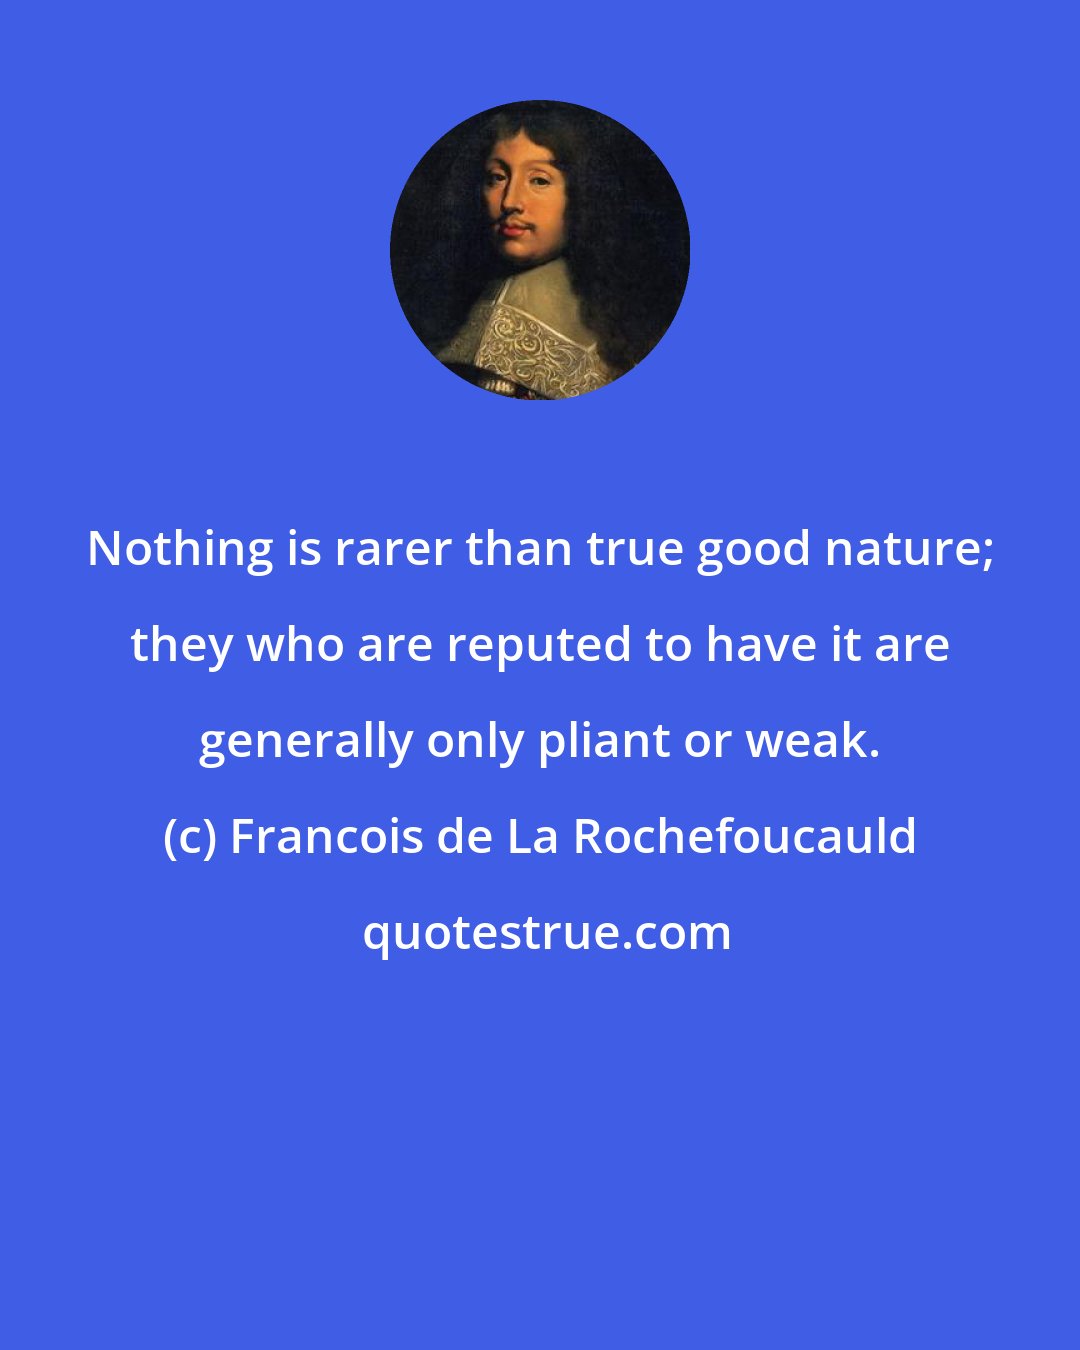 Francois de La Rochefoucauld: Nothing is rarer than true good nature; they who are reputed to have it are generally only pliant or weak.